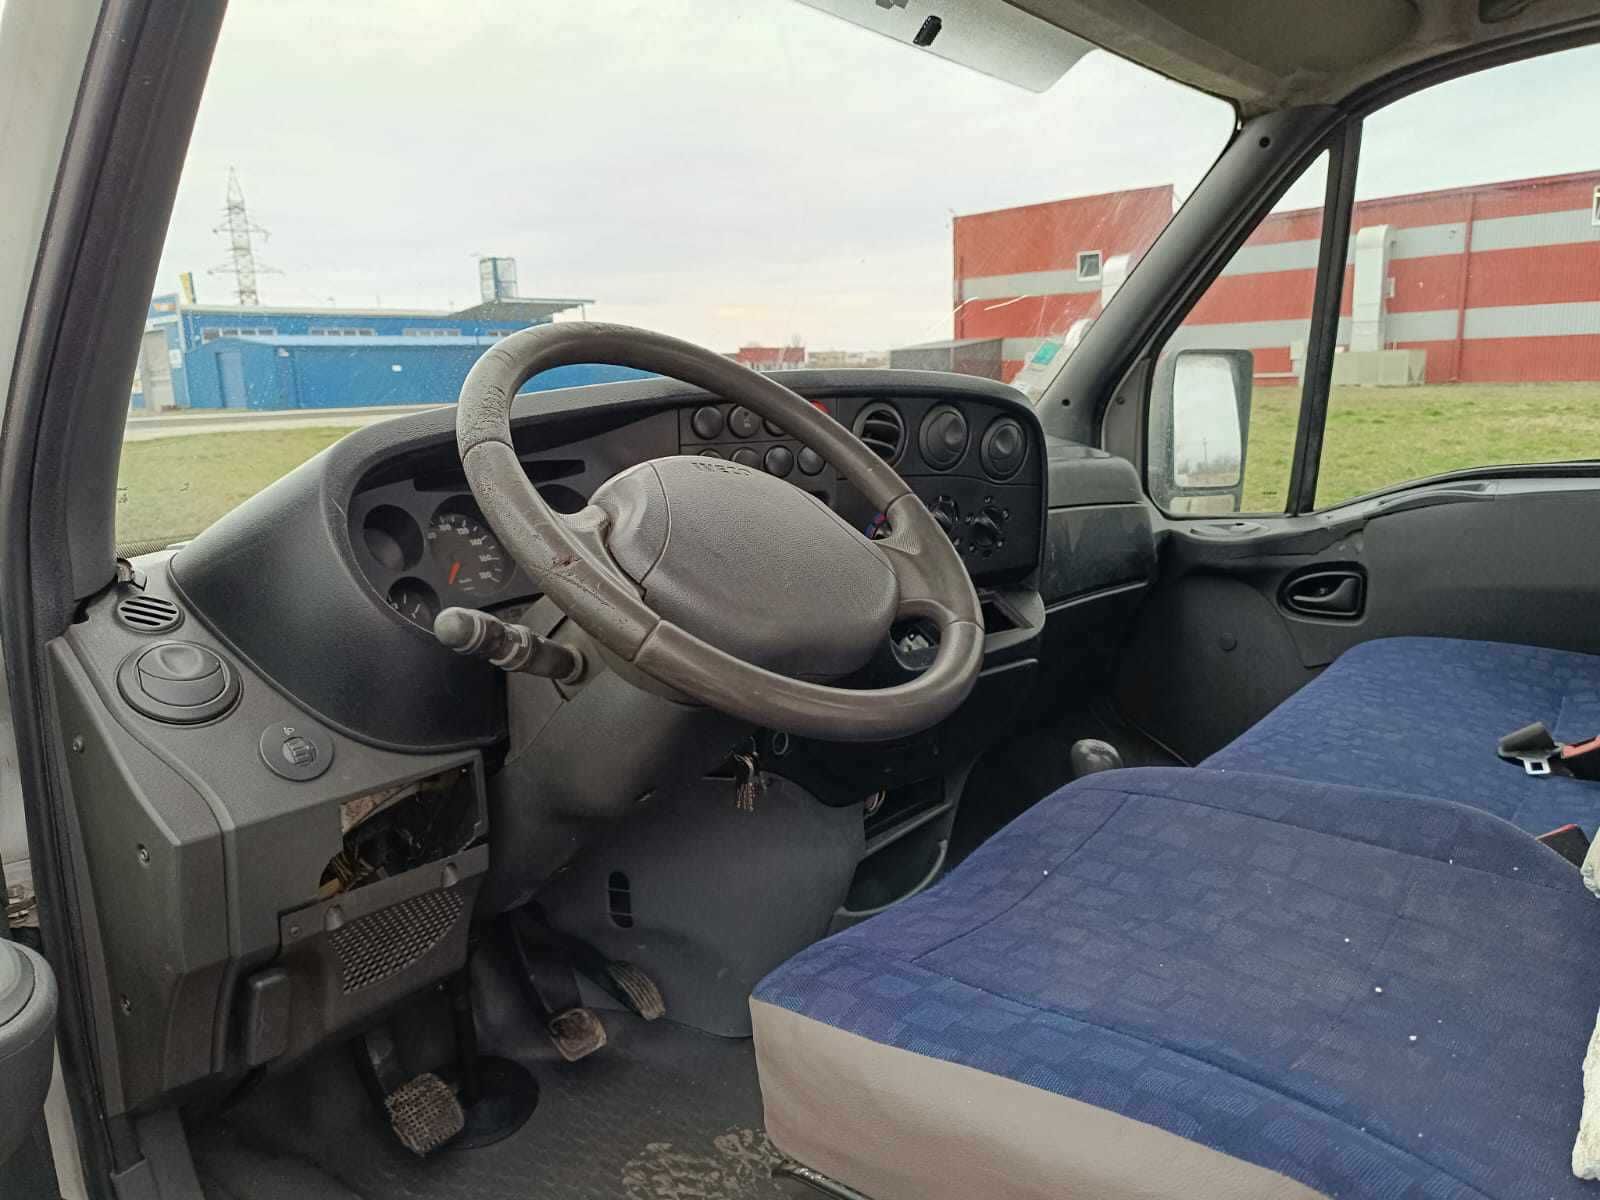 Iveco Daily 35c12 basculabil